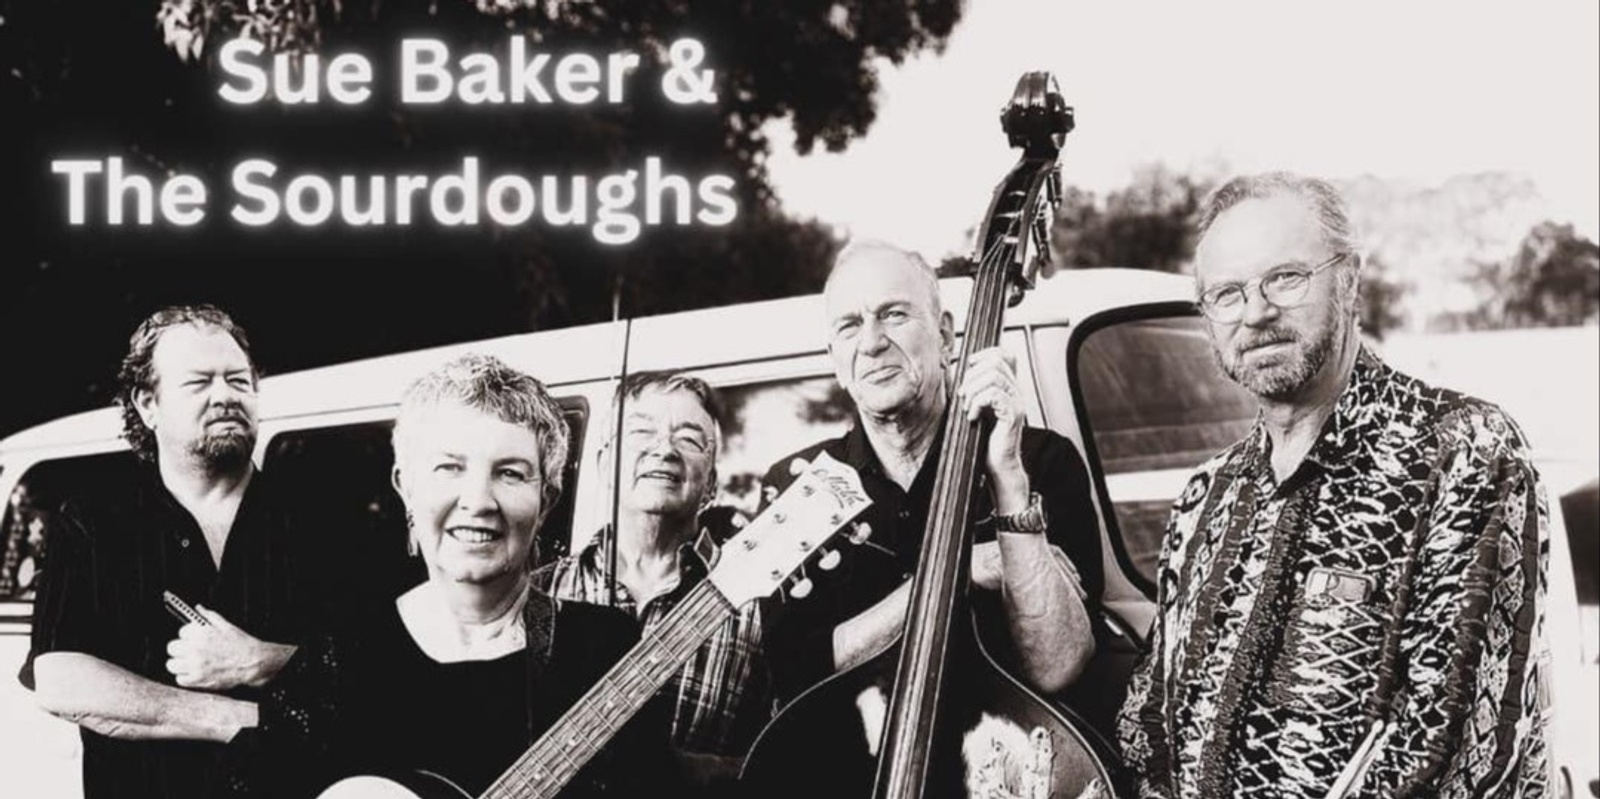 Banner image for Sue Baker and the Sourdoughs, supported by Elliot Litchfield and Kirrily May